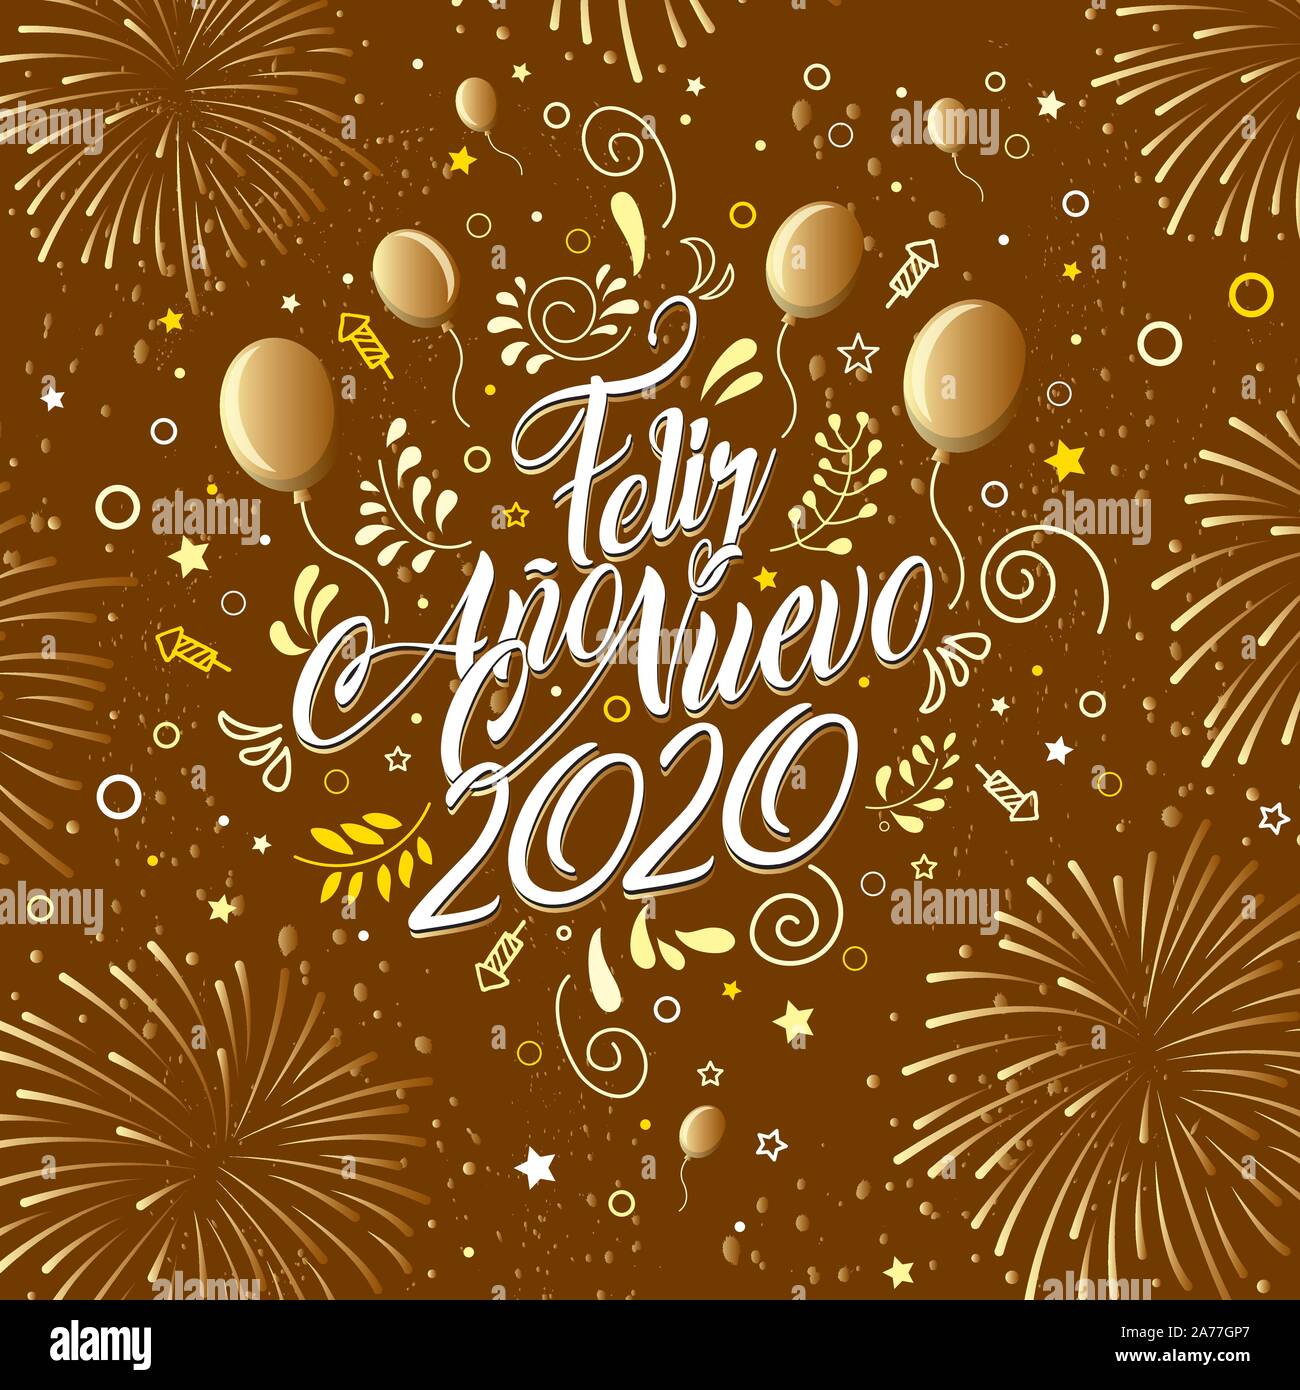 Greeting Card With The Message Feliz Ano Nuevo Happy New Year In Spanish Language Card Decorated With Balloons Stars And Fireworks Stock Vector Image Art Alamy